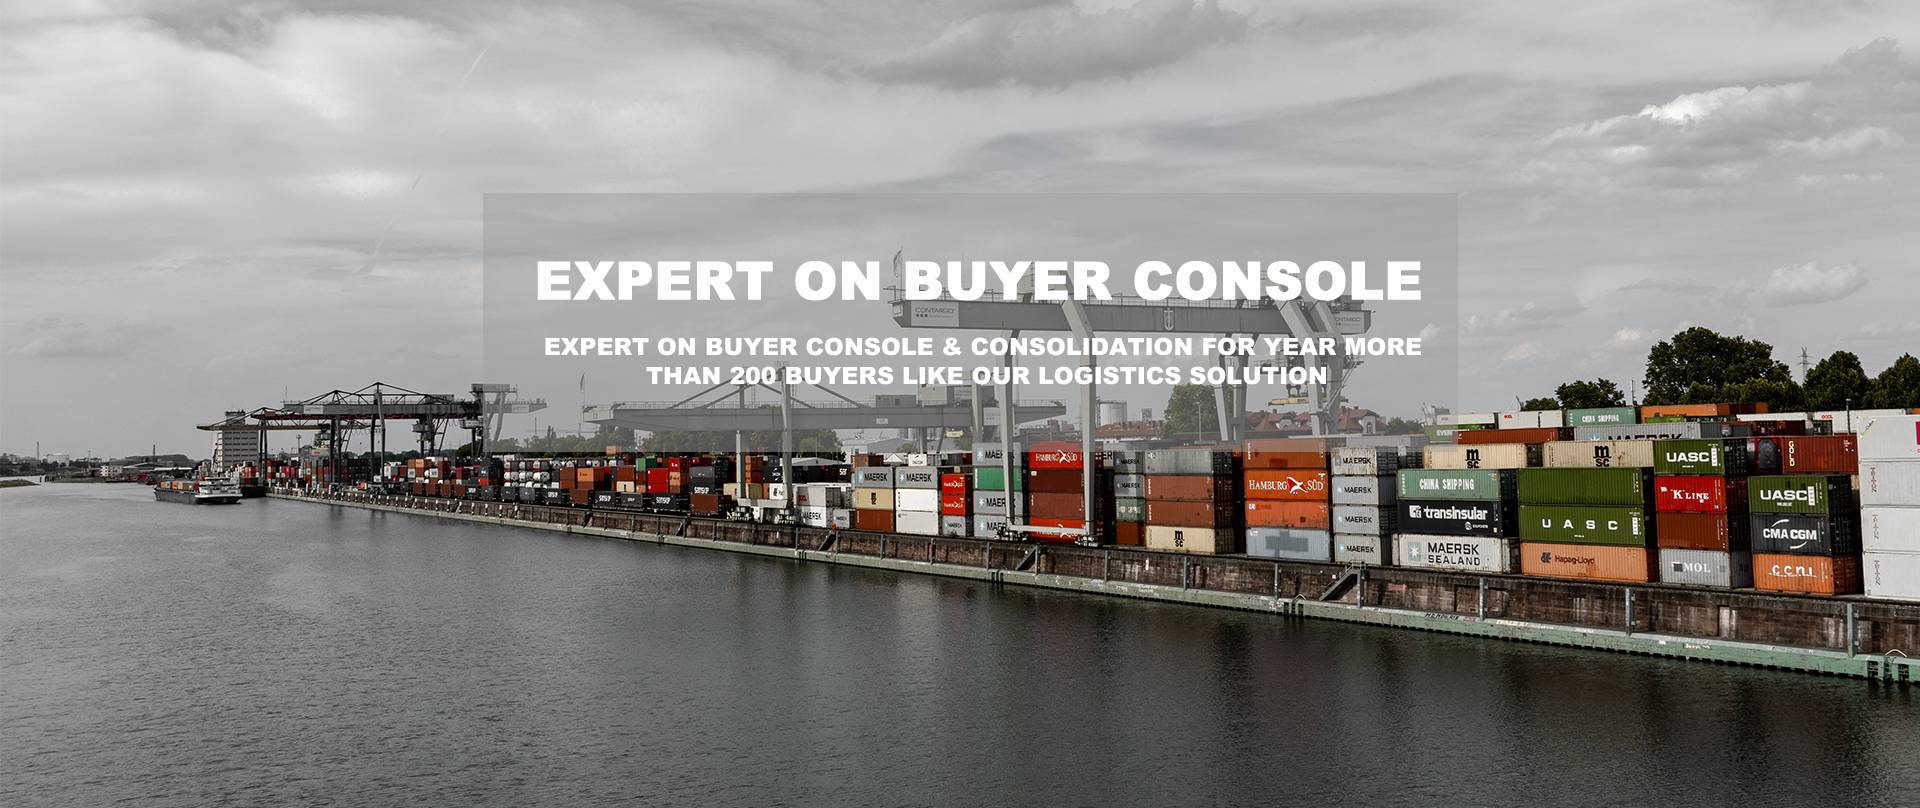 Expert On Buyer Console